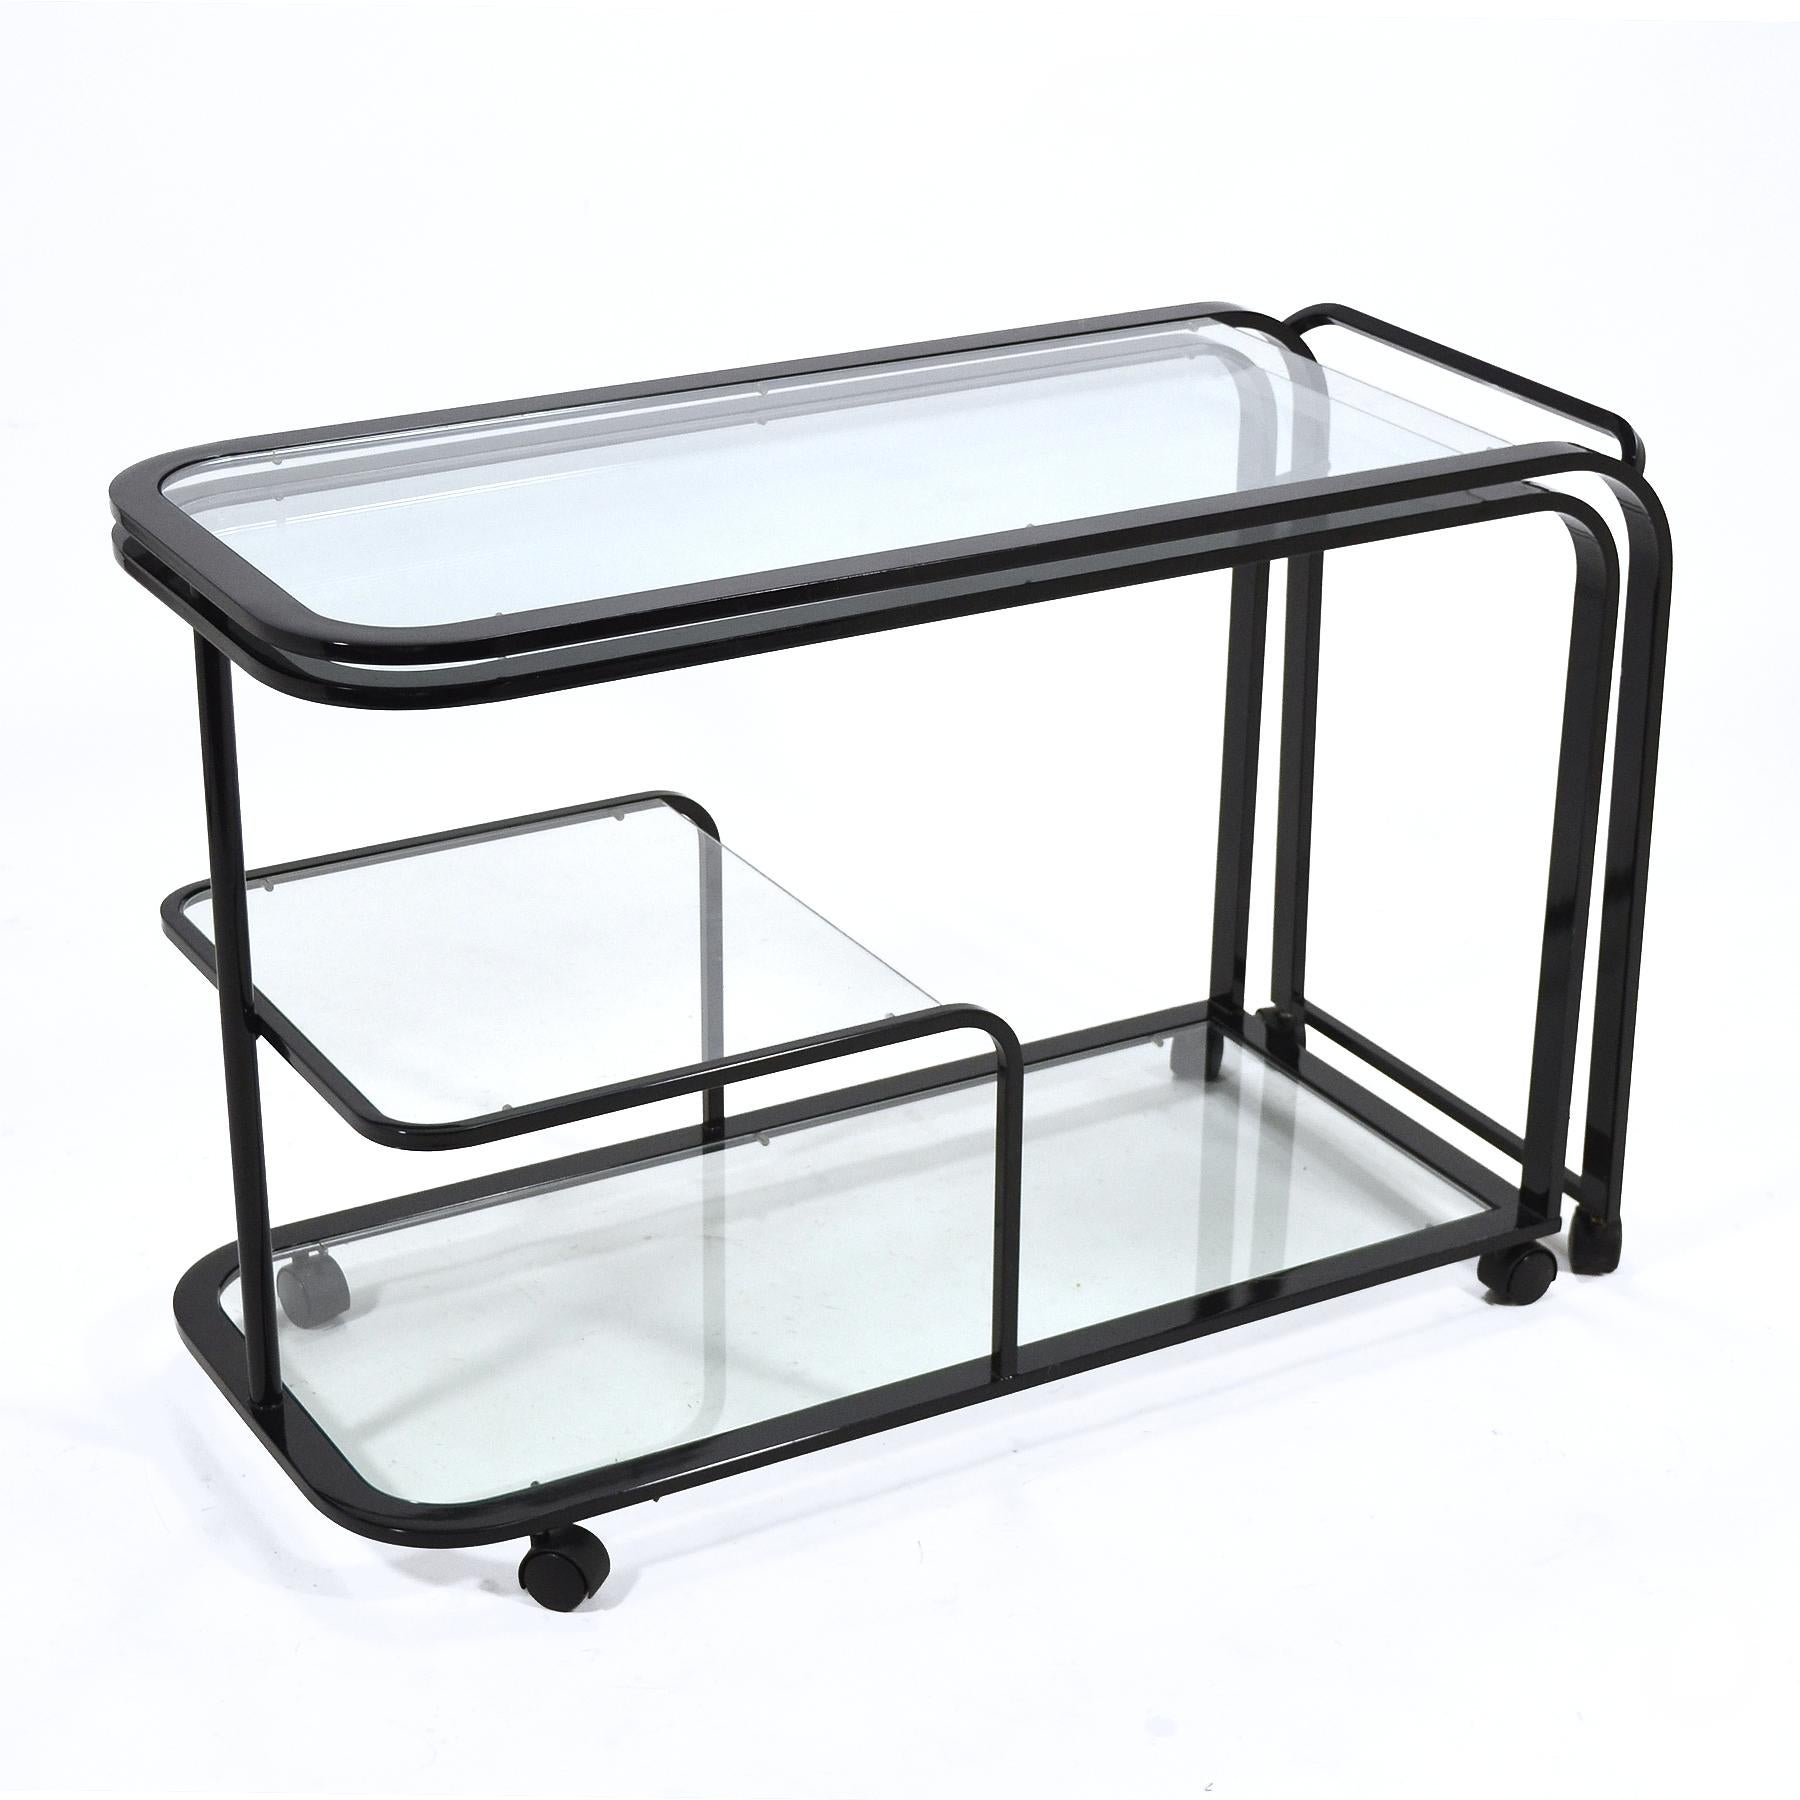 This great bar cart or serving cart by Design Institute of America can unlatch, swing open, and double in size to serve a large party. More commonly seen in brass or chrome, the black finish on the frame of this example lends a stronger graphic